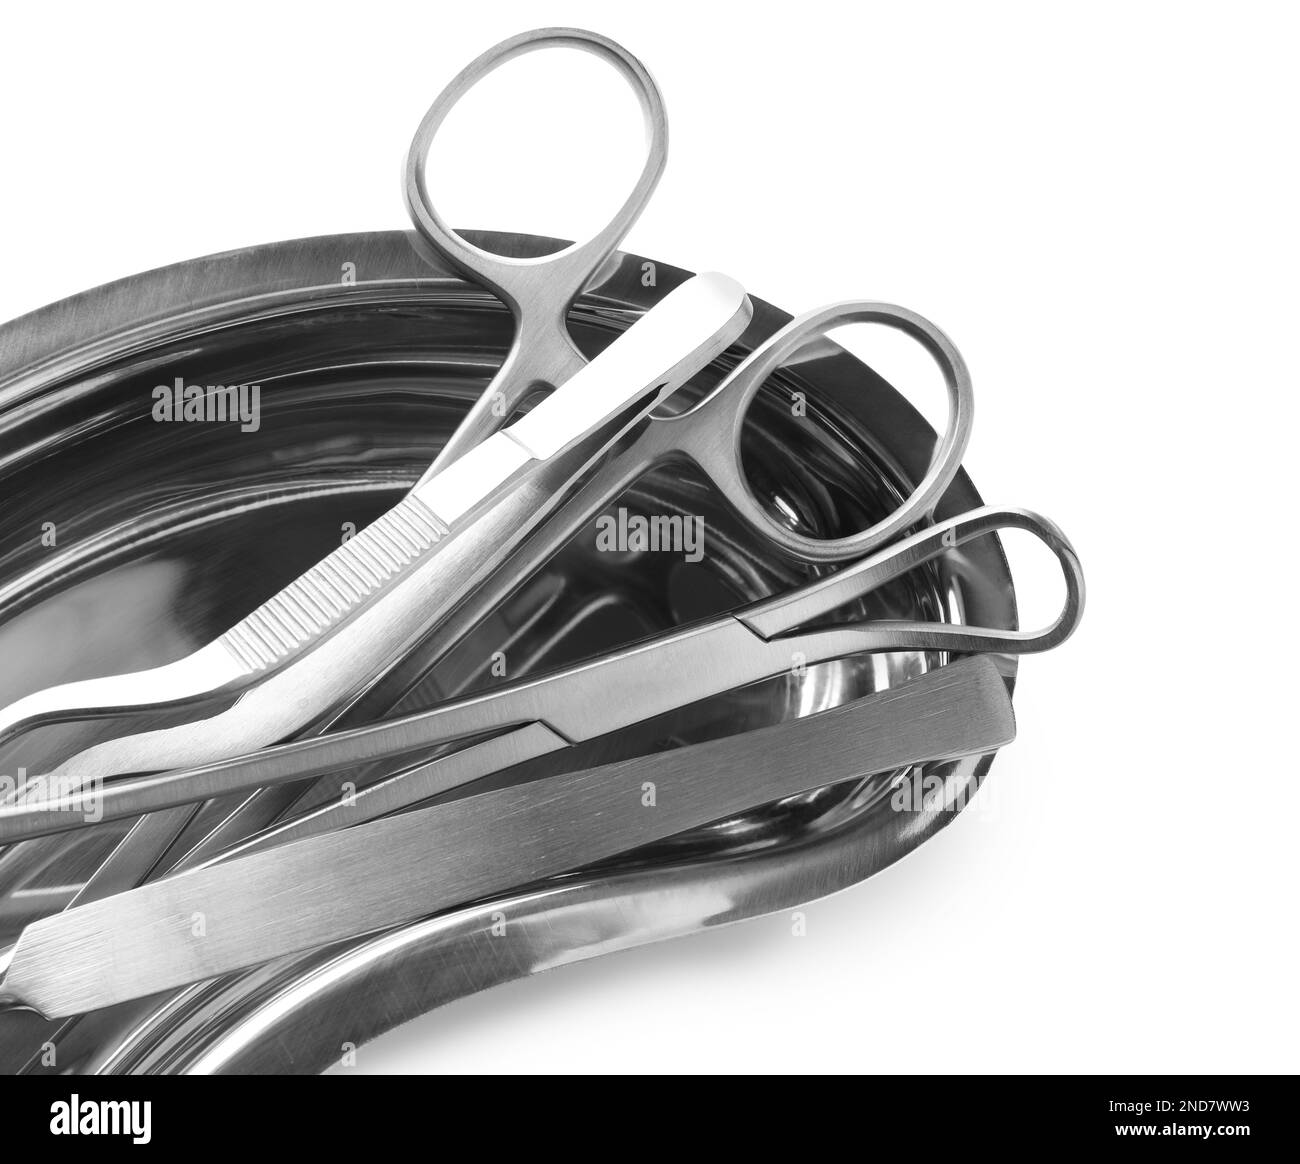 Surgical instruments in kidney dish on white background, top view Stock Photo